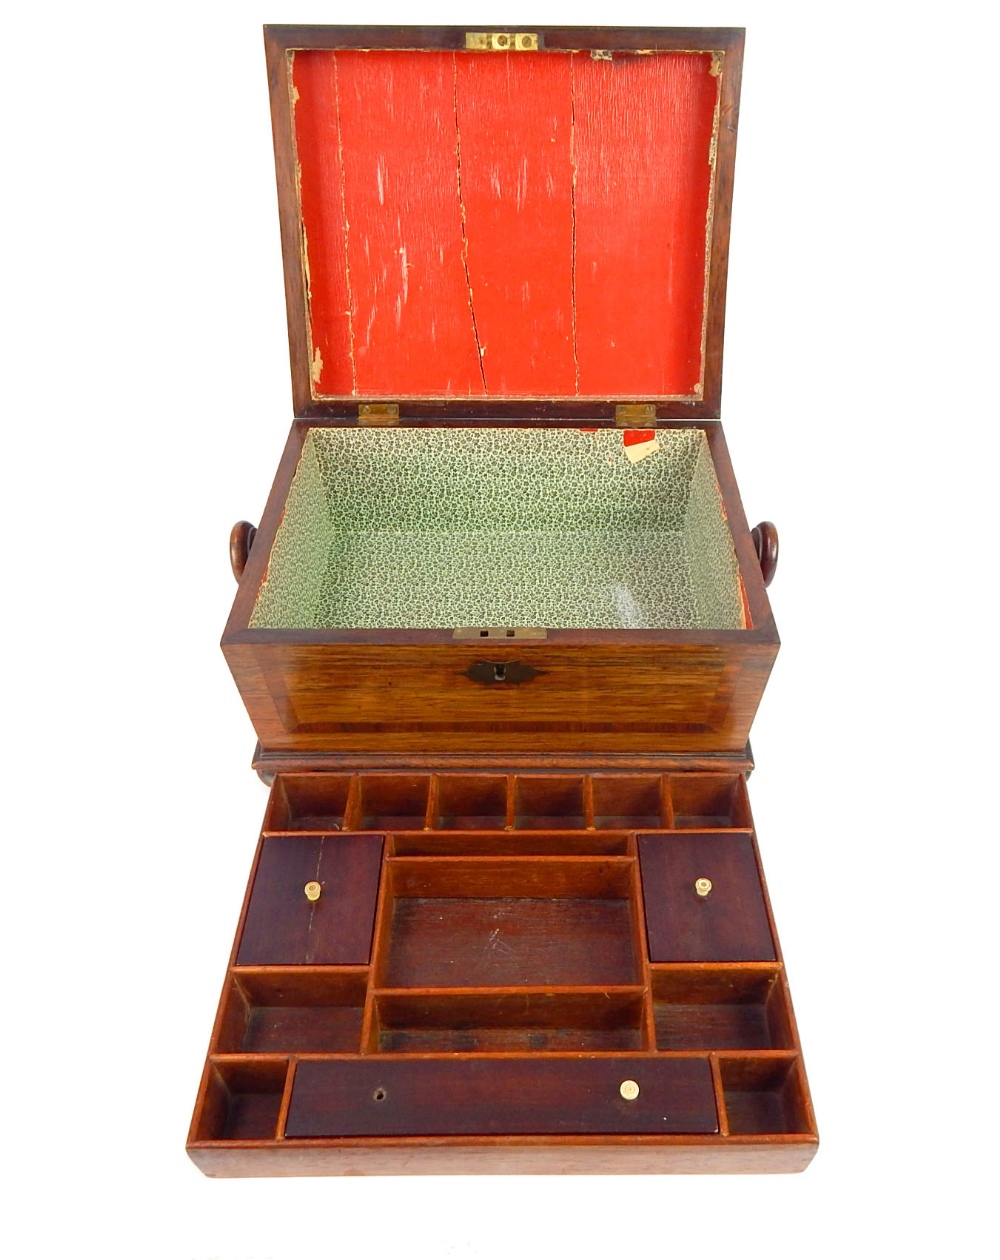 French Empire sewing box, rosewood, brass tablet to E Dix 1831, turned handles, fitted tray, bun - Image 6 of 8